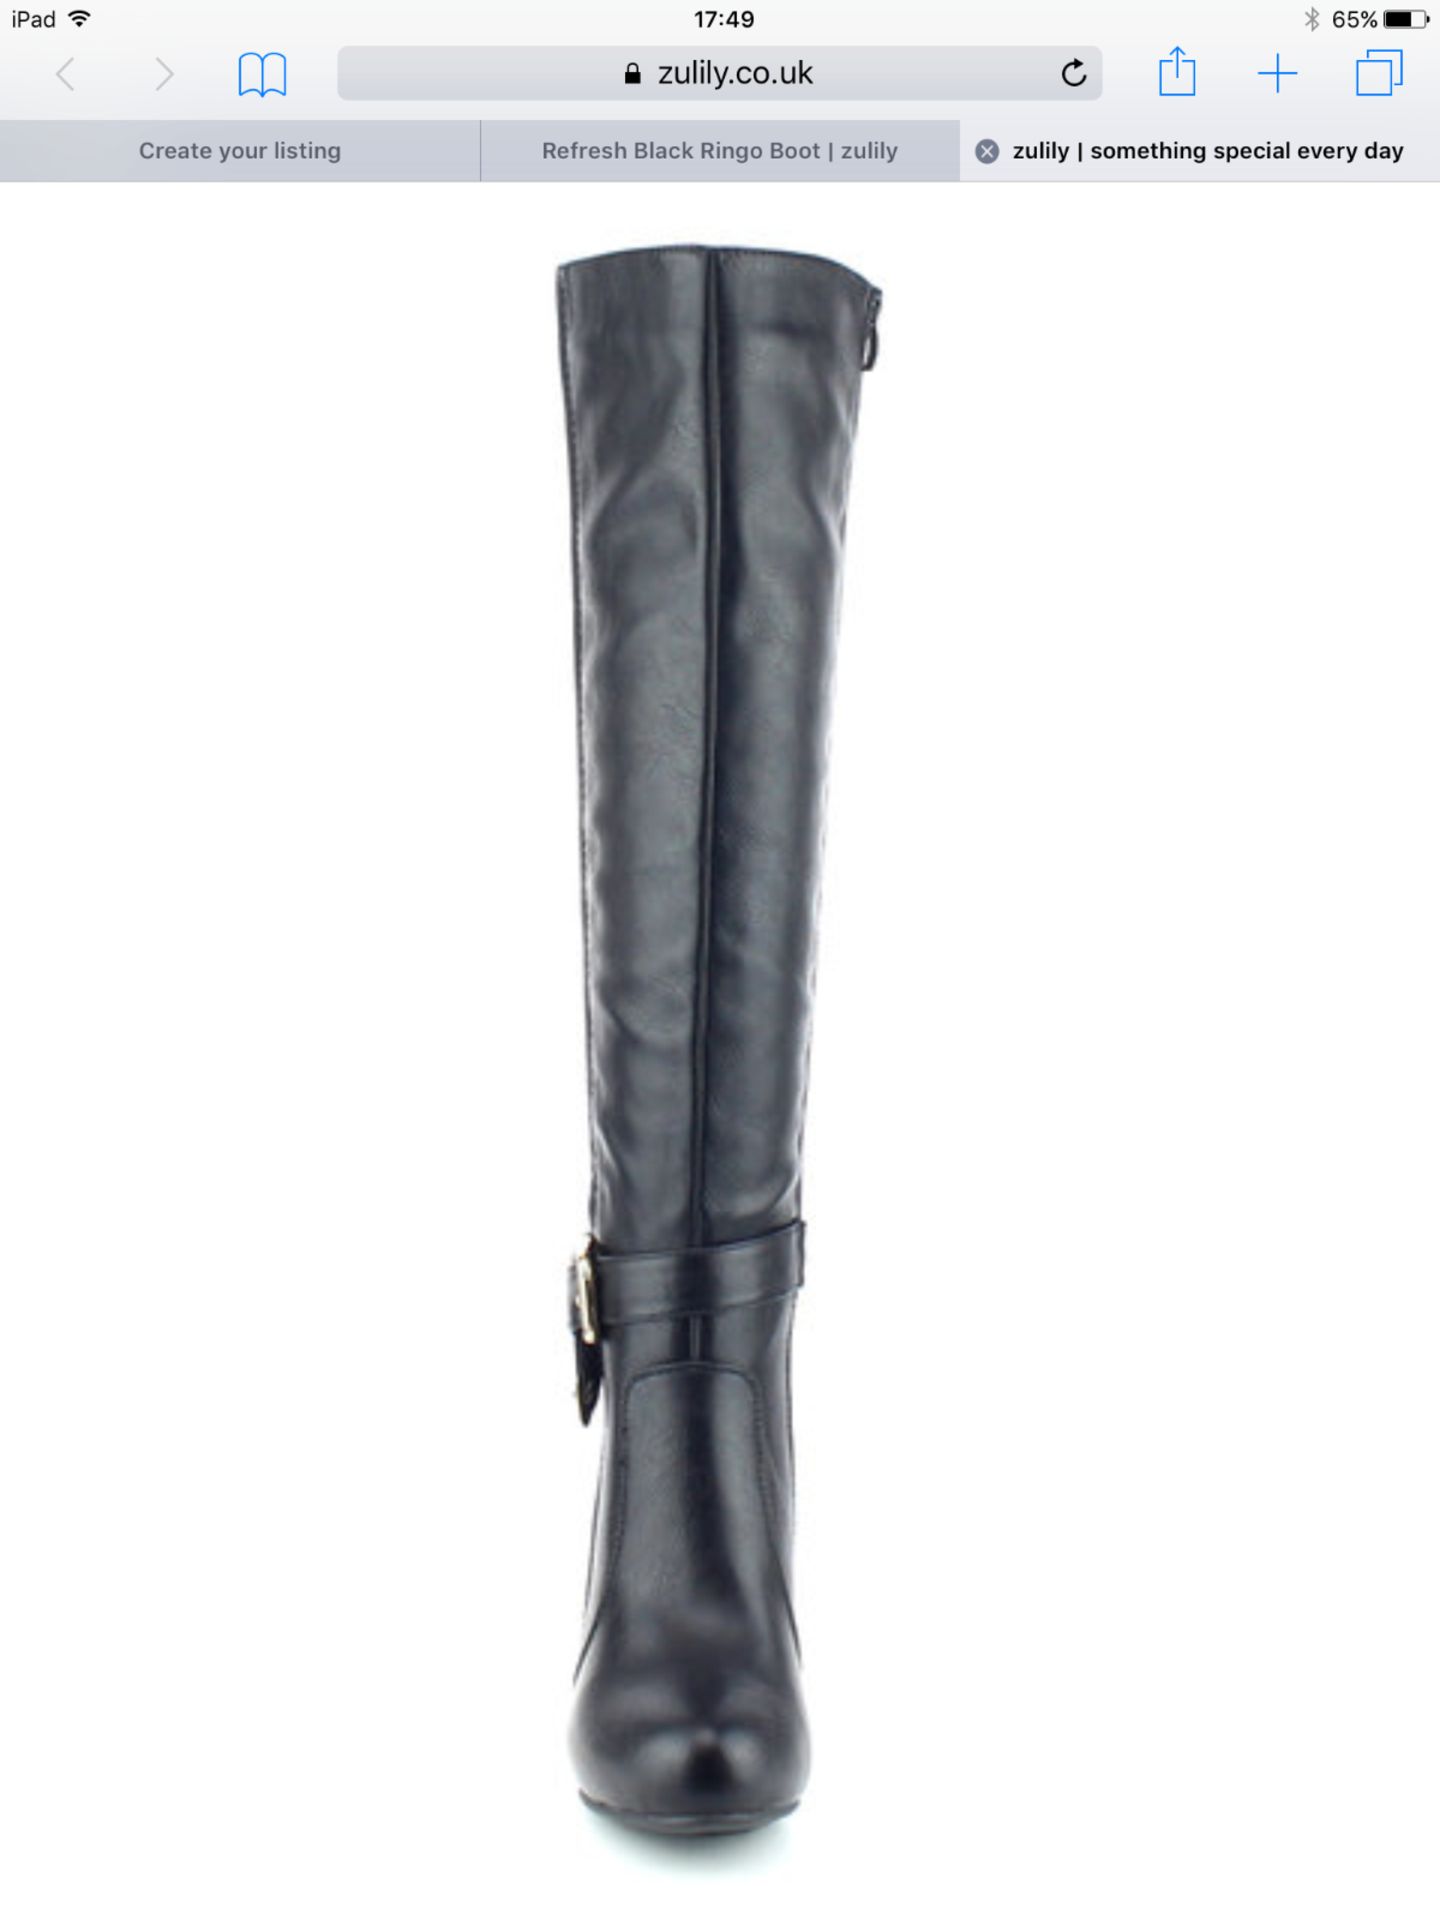 Refresh Black Ringo Boot, Size Eur 40 (New with box) [Ref: 31414984- H-002] - Image 4 of 7